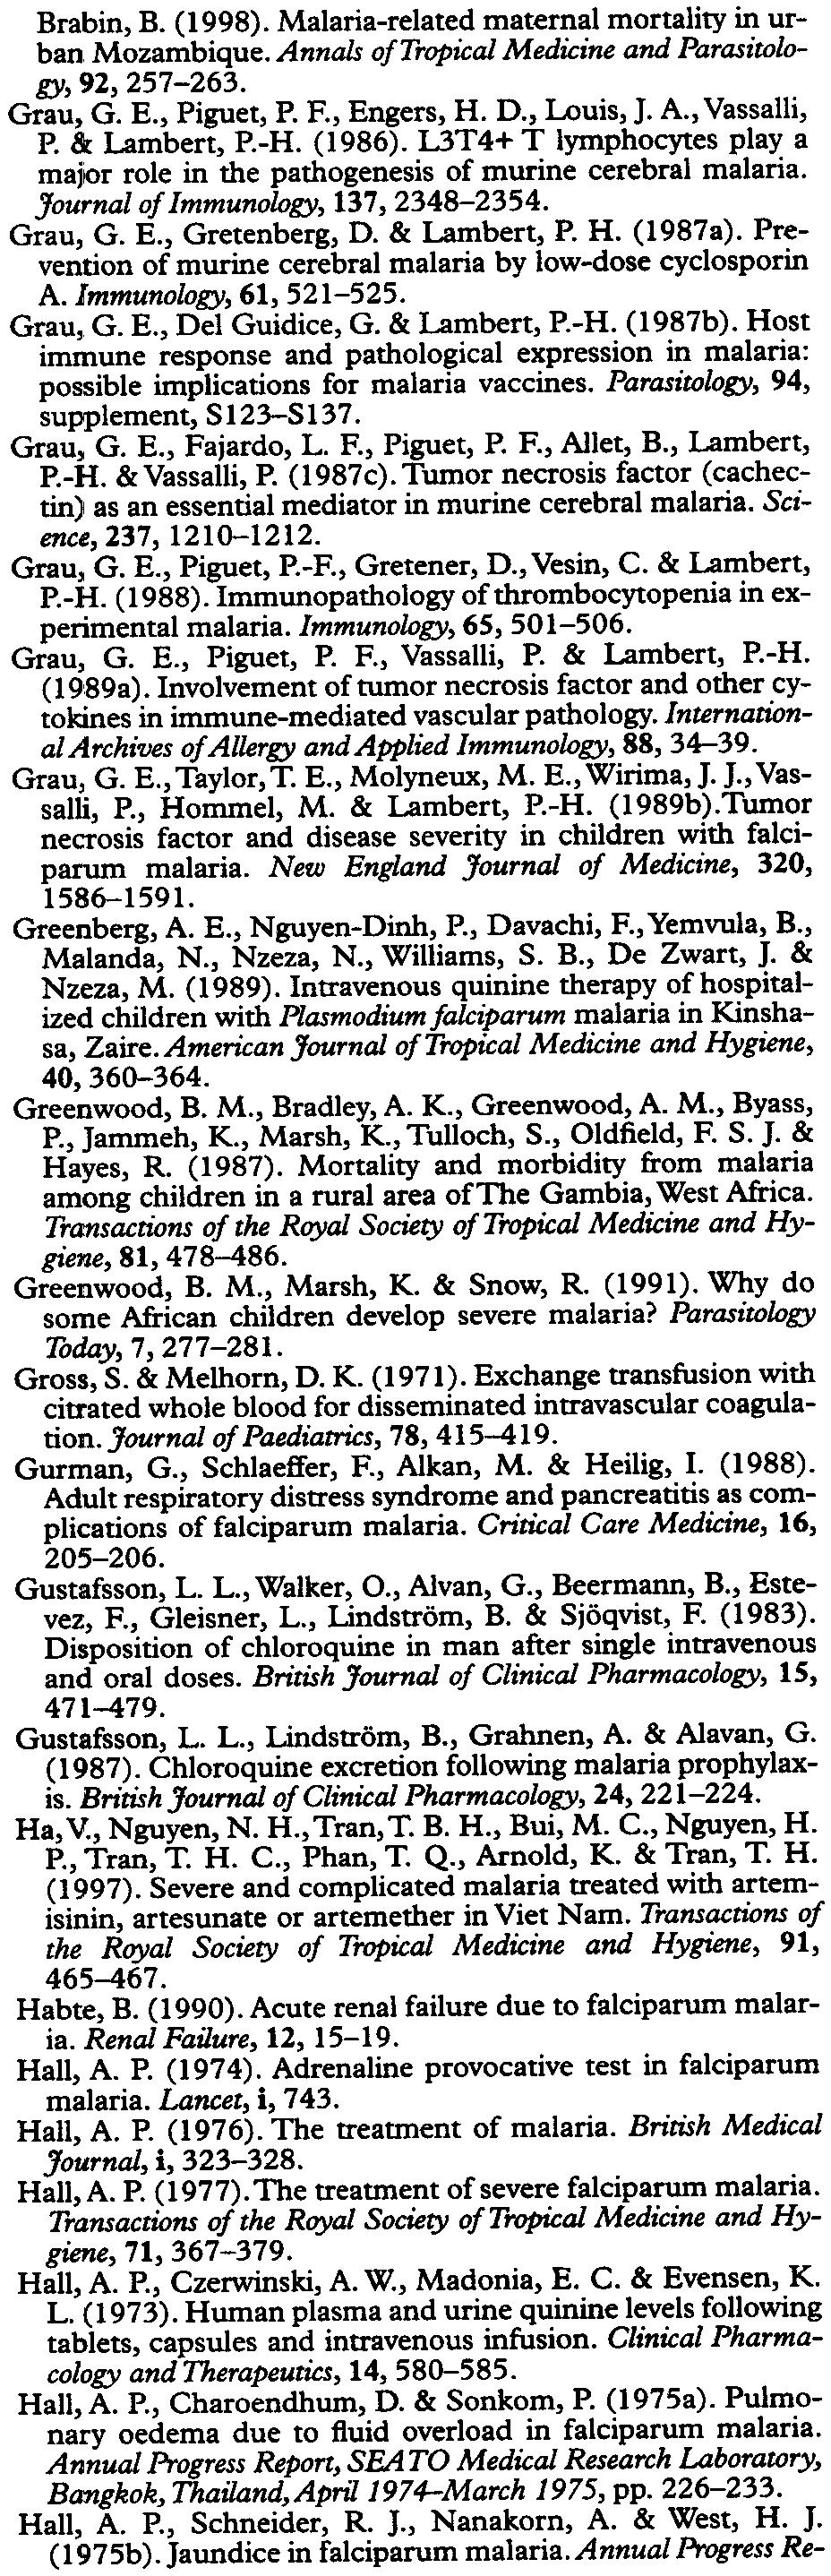 Tropical obstetrics & gynaecology. 1. Anaemia in pregnancy in tropical Africa. Transactions of the Royal Society of Tropical Medicine and Hygiene, 83, 441-448. Fletndng, A. F. & AIlan, N. C. (1969).